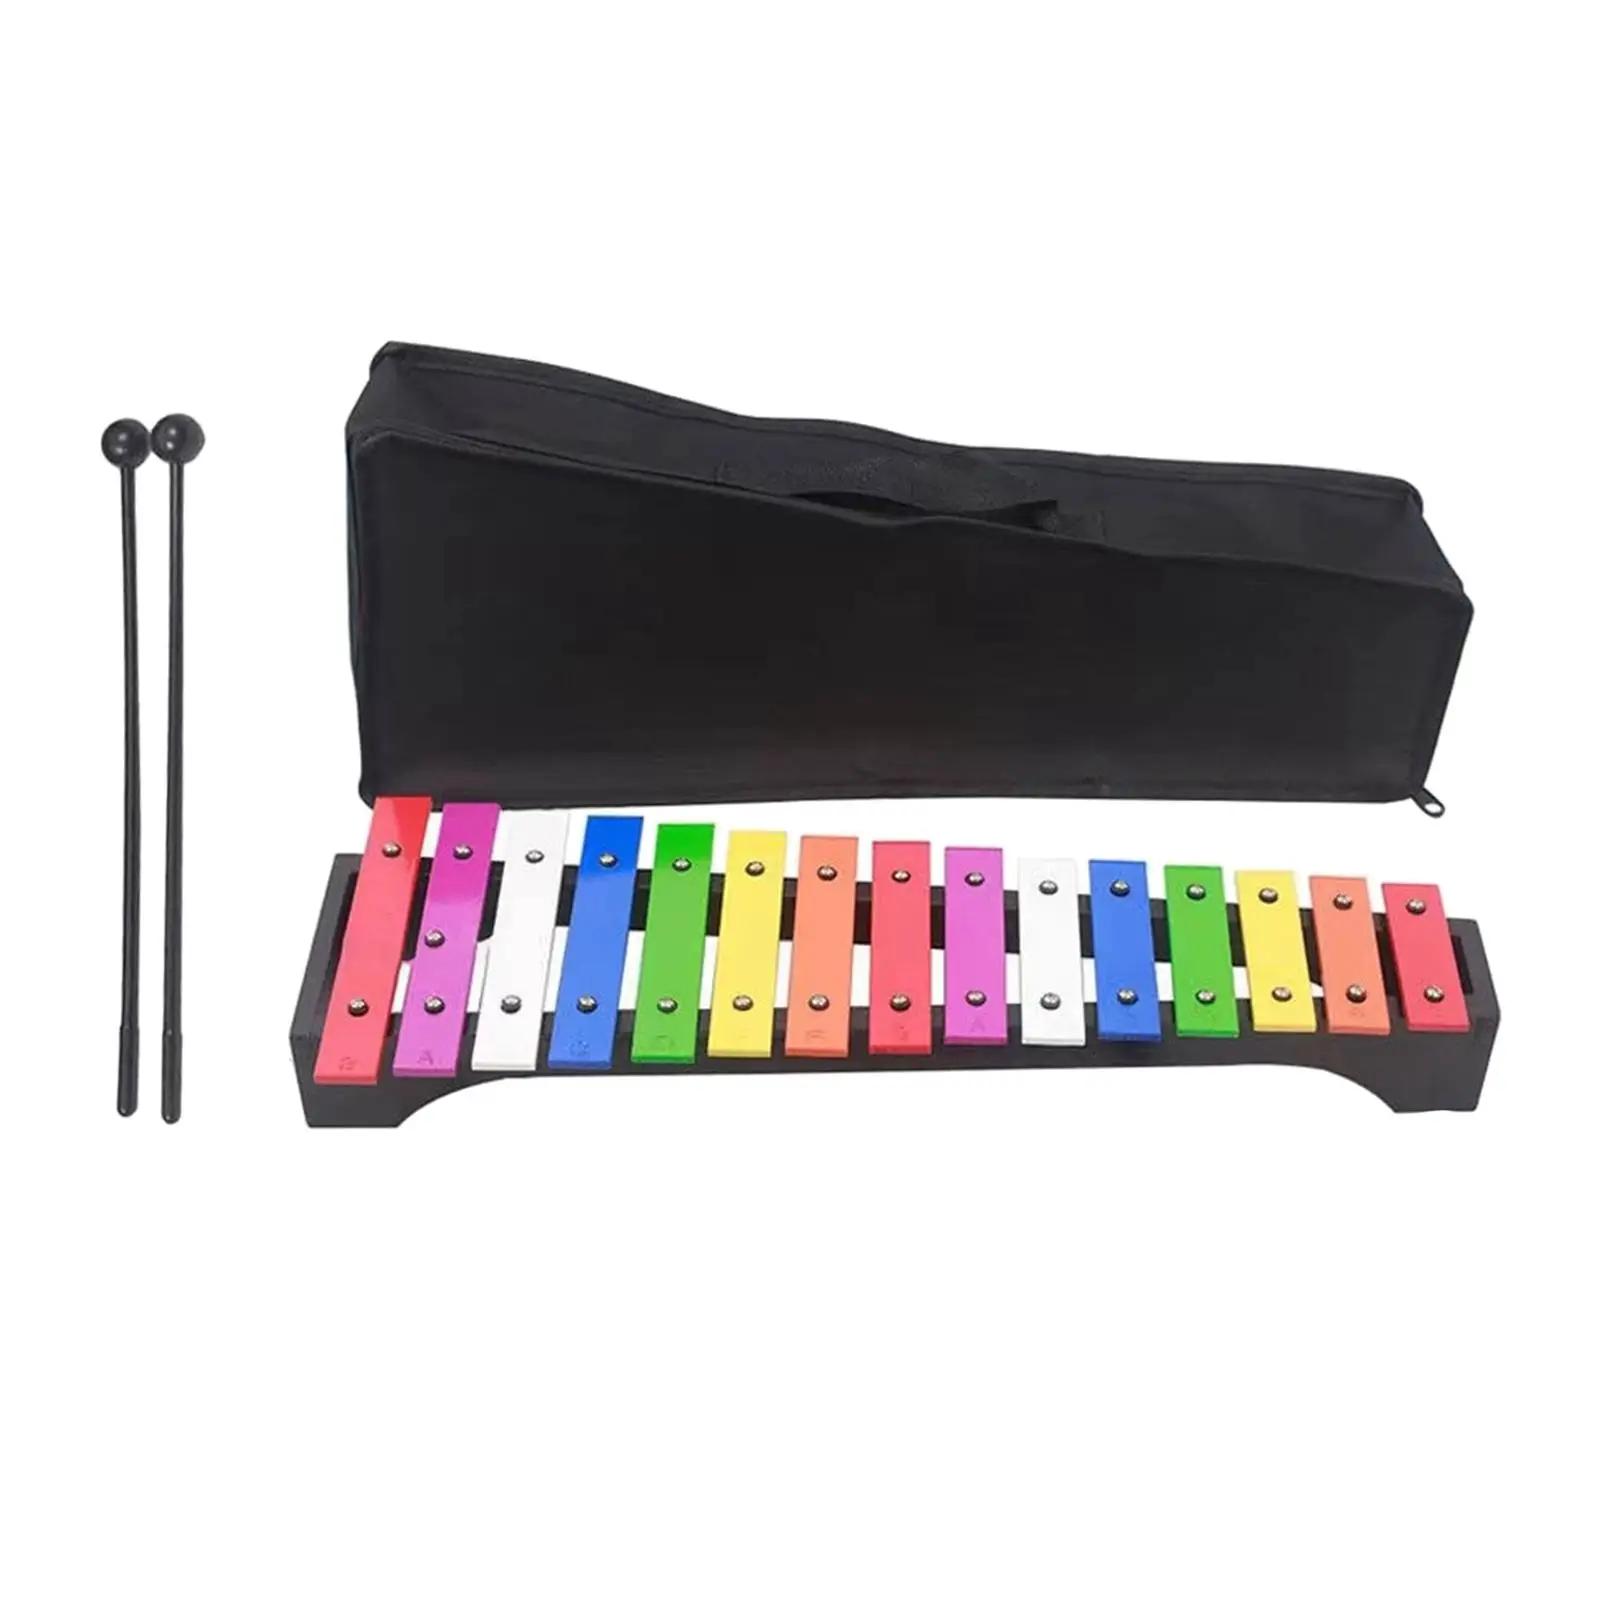 15 Note Glockenspiel Metal Enlightenment Hand Knock Piano Toy for Outside Concert Event School Orchestras Live Performance